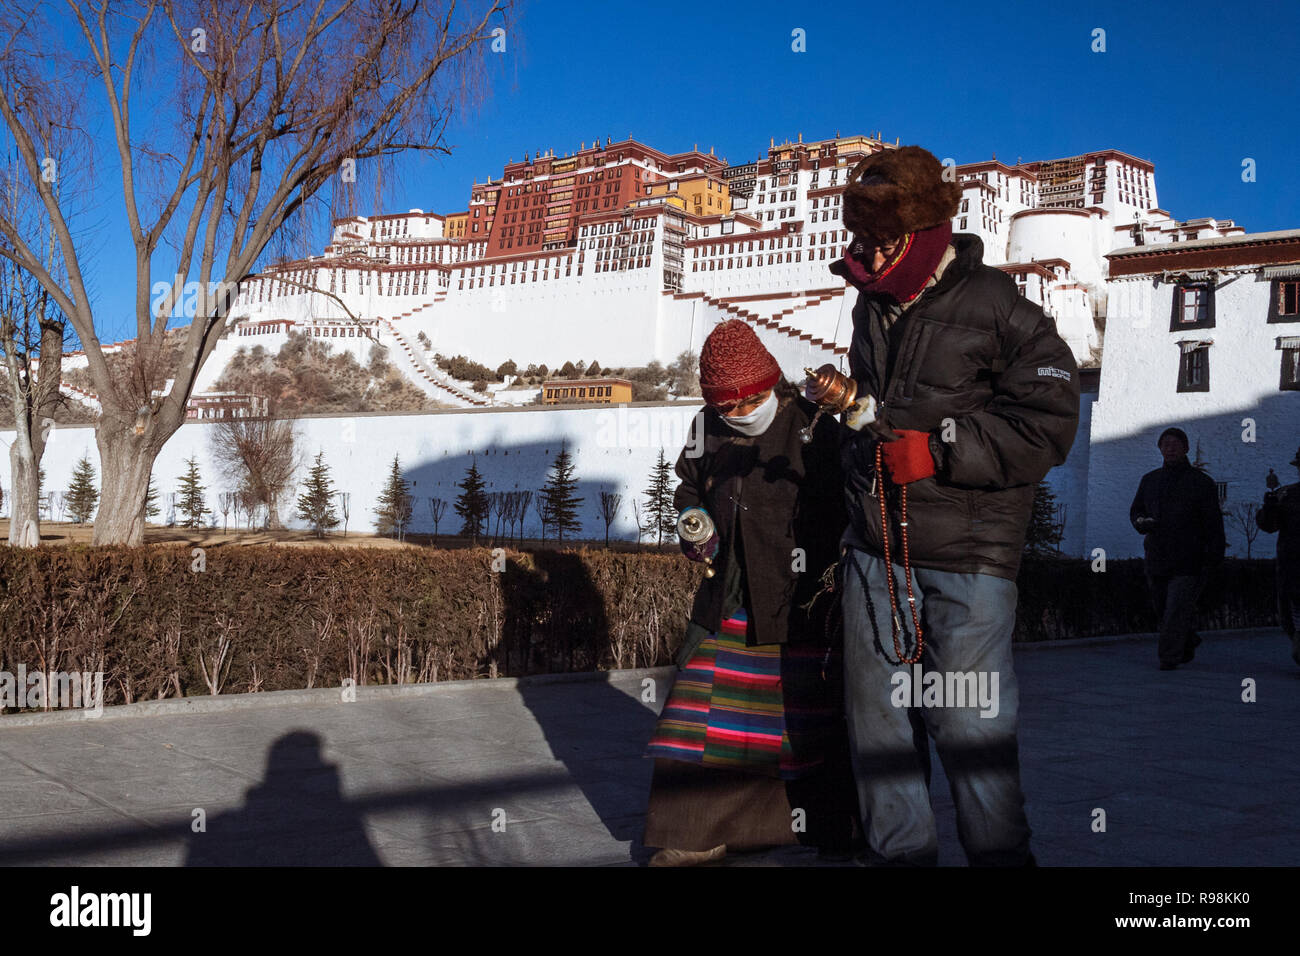 Lhasa, Tibet Autonomous Region, China : Tibetan people perform the kora Buddhist pilgrimage around the Potala Palace. First built in 1645 by the 5th D Stock Photo